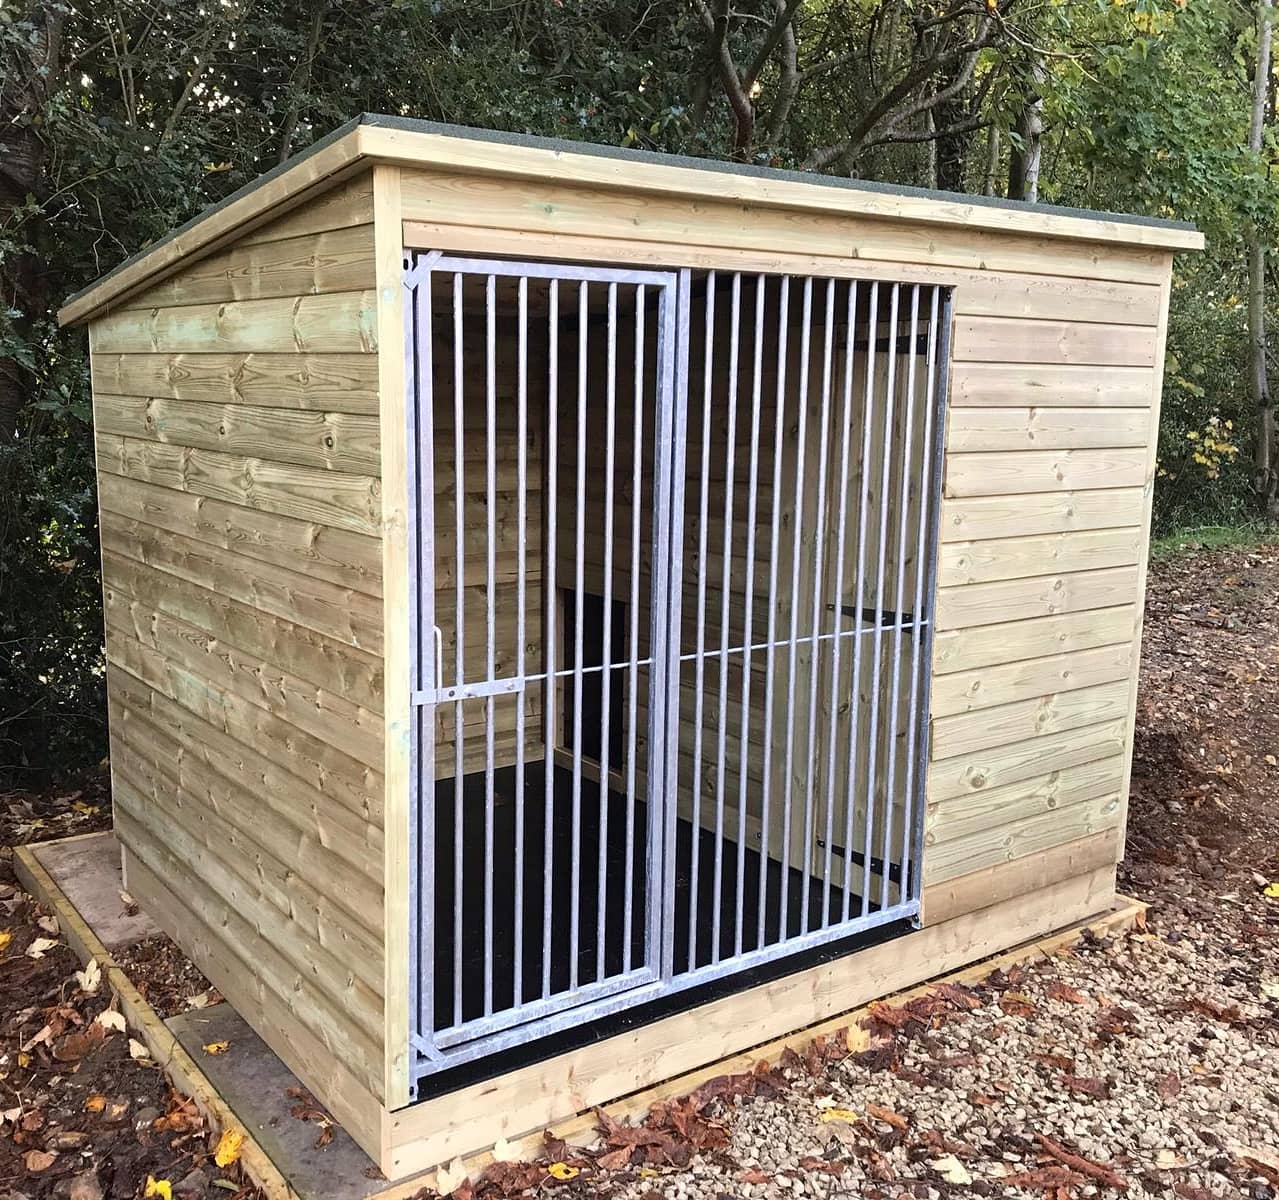 Chesterfield Wooden Dog Kennel And Run 10'6ft (wide) x 6ft (depth) x 5'11ft (high)